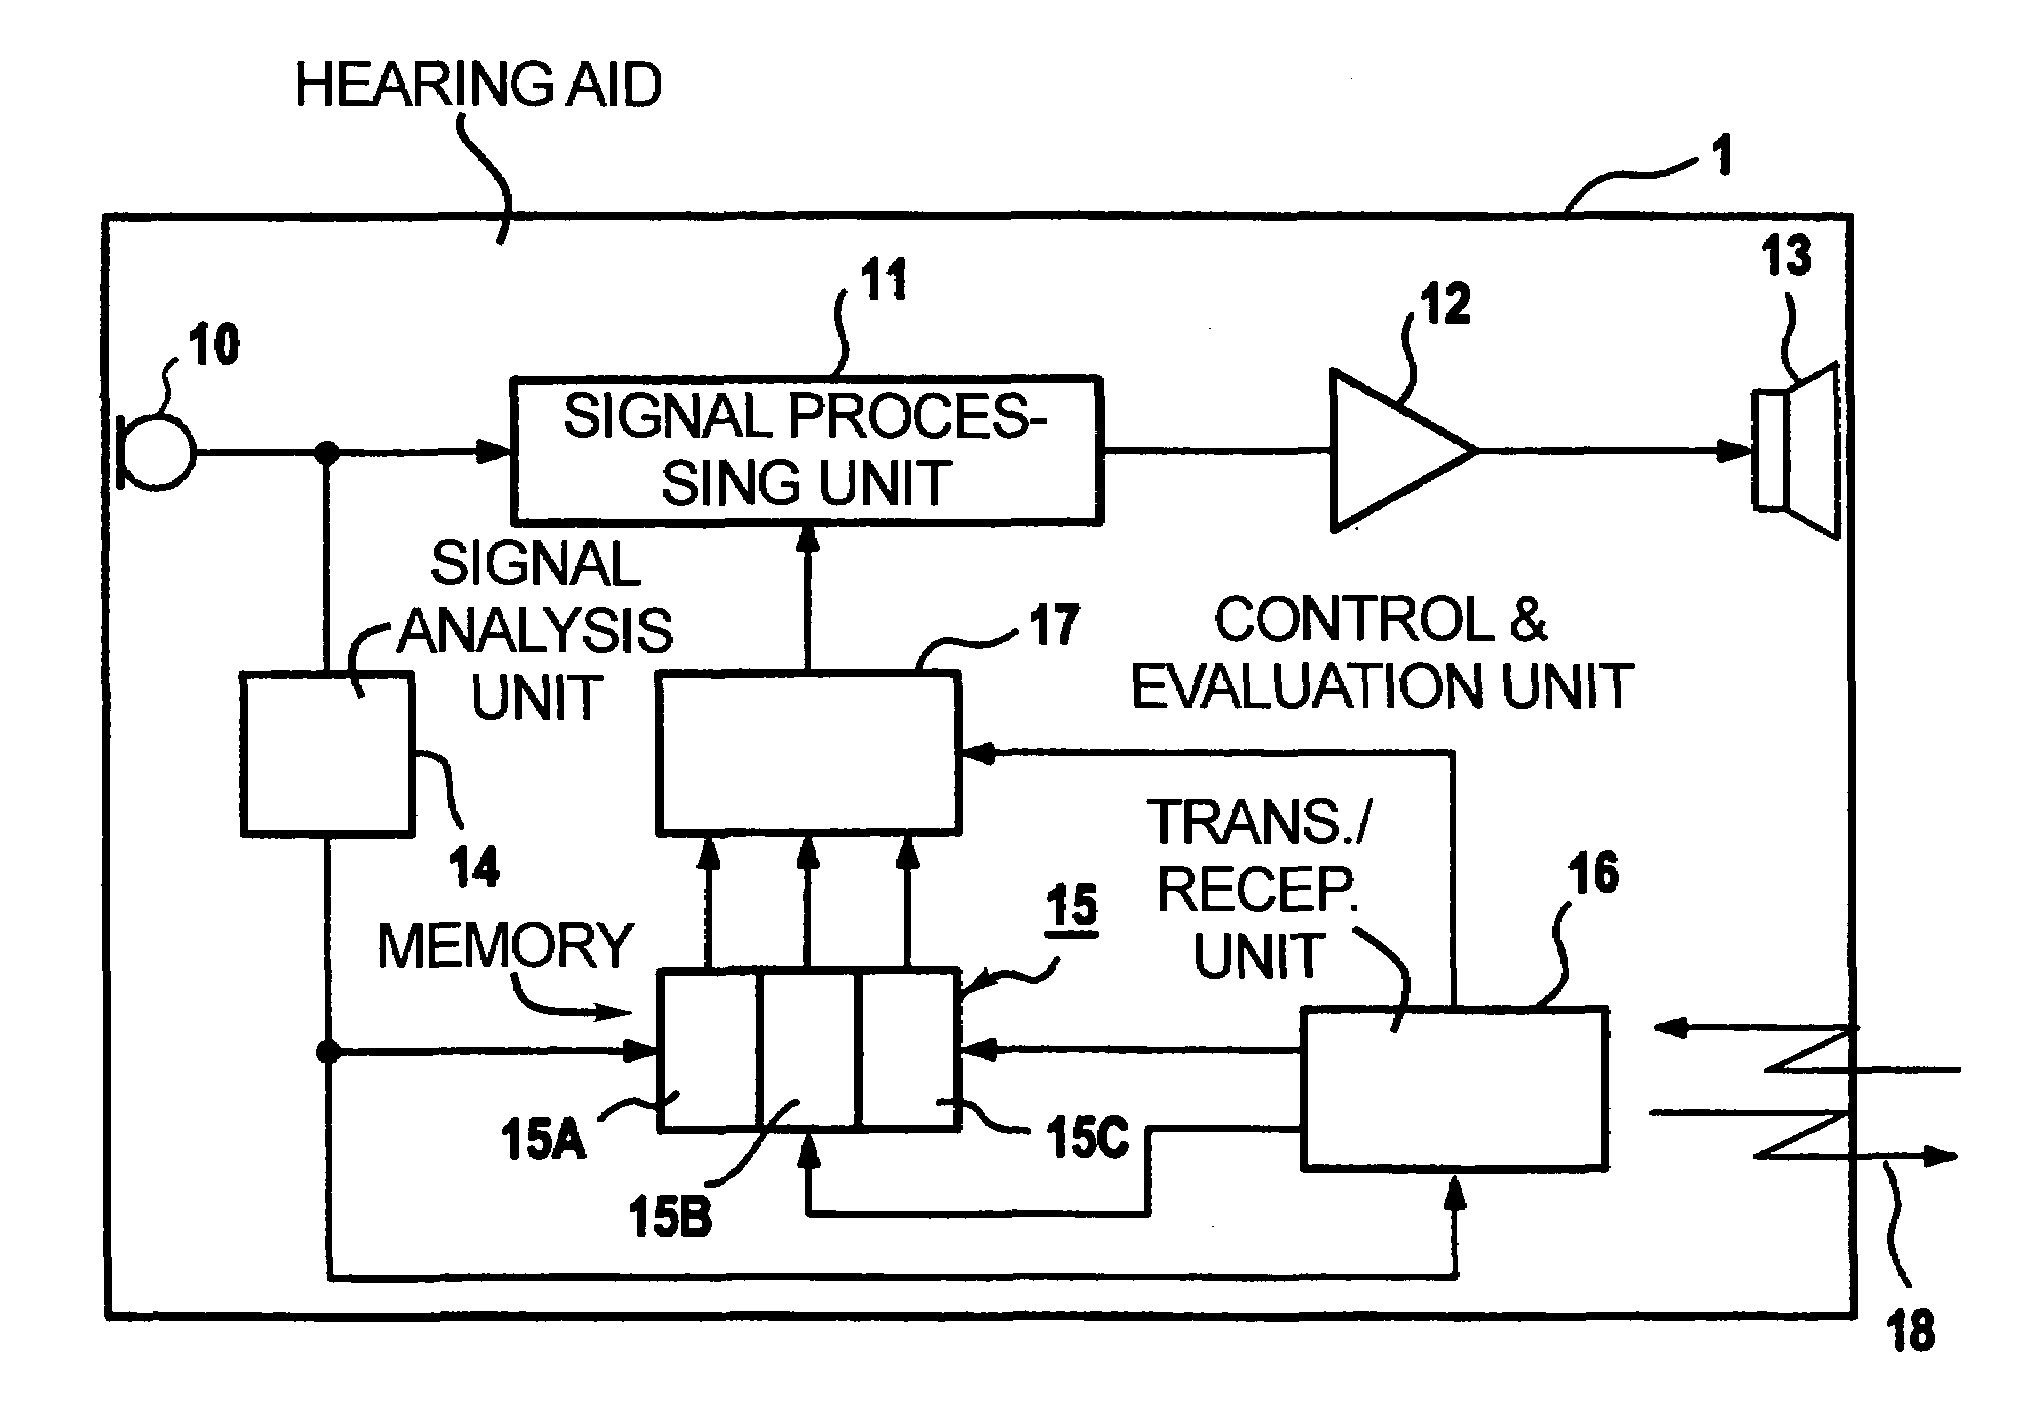 Method for operating a hearing aid system and hearing aid system